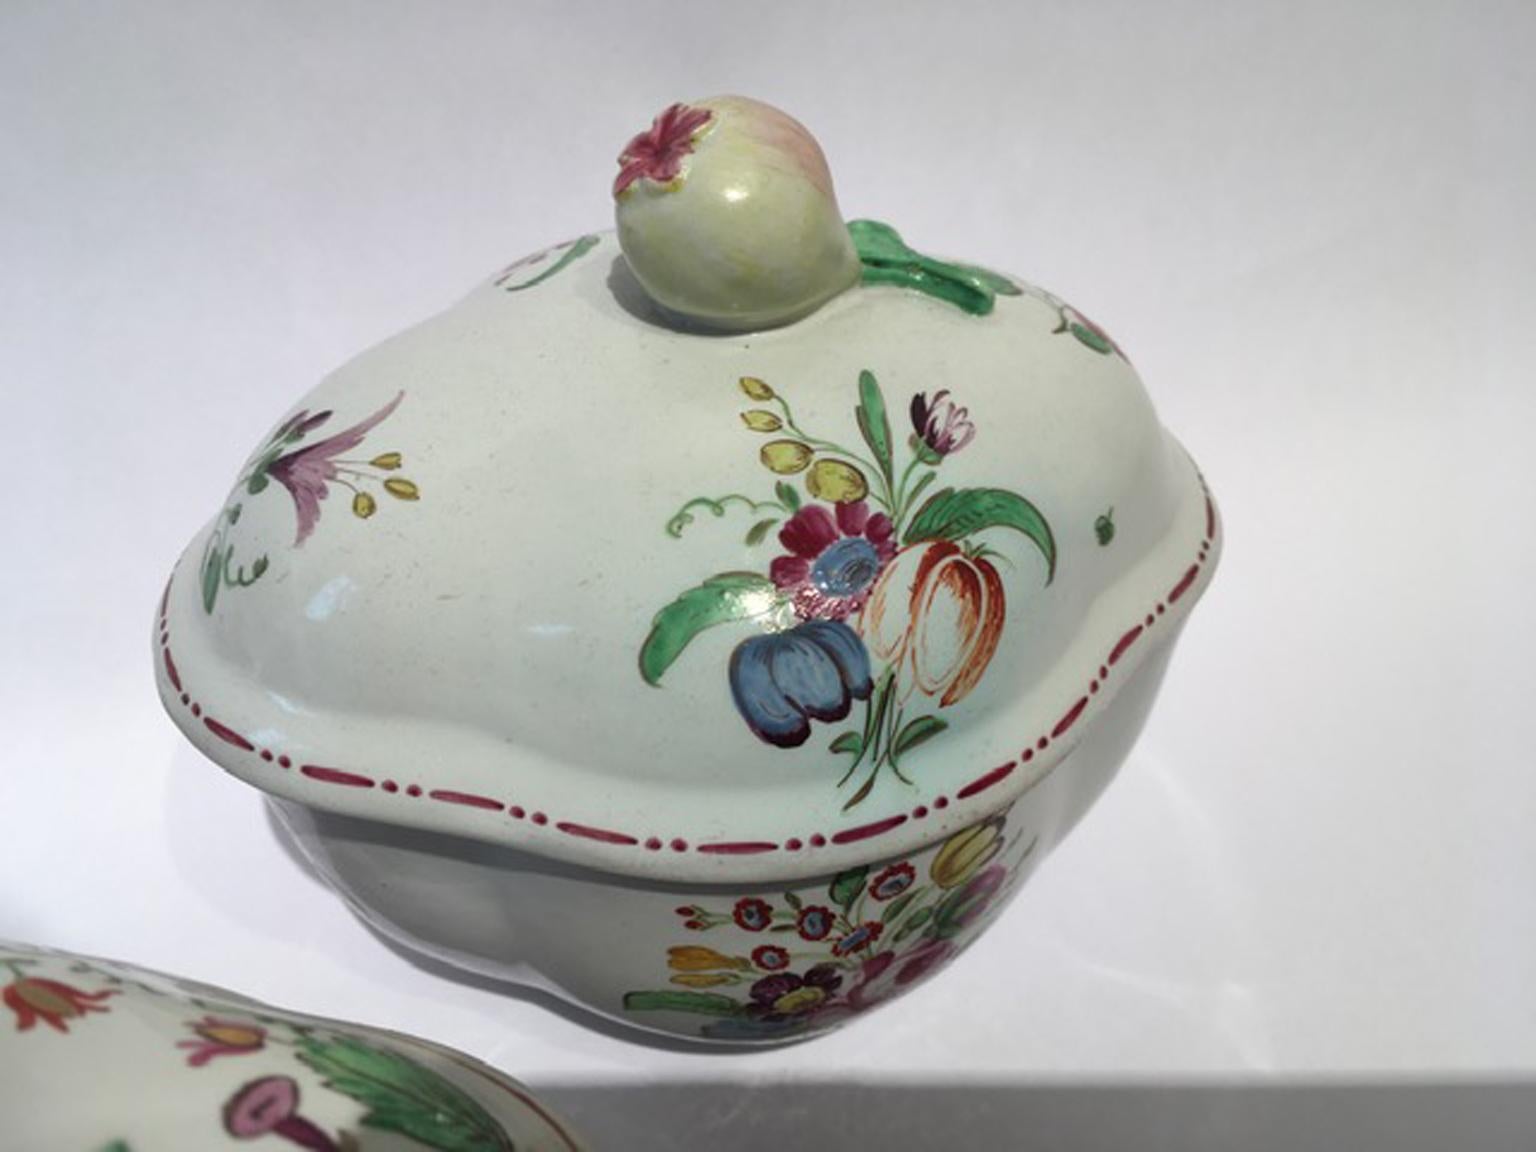 Italy Late 18th Century Richard Ginori Set 3 Porcelain Sugar Bowls Floral Decor In Good Condition For Sale In Brescia, IT